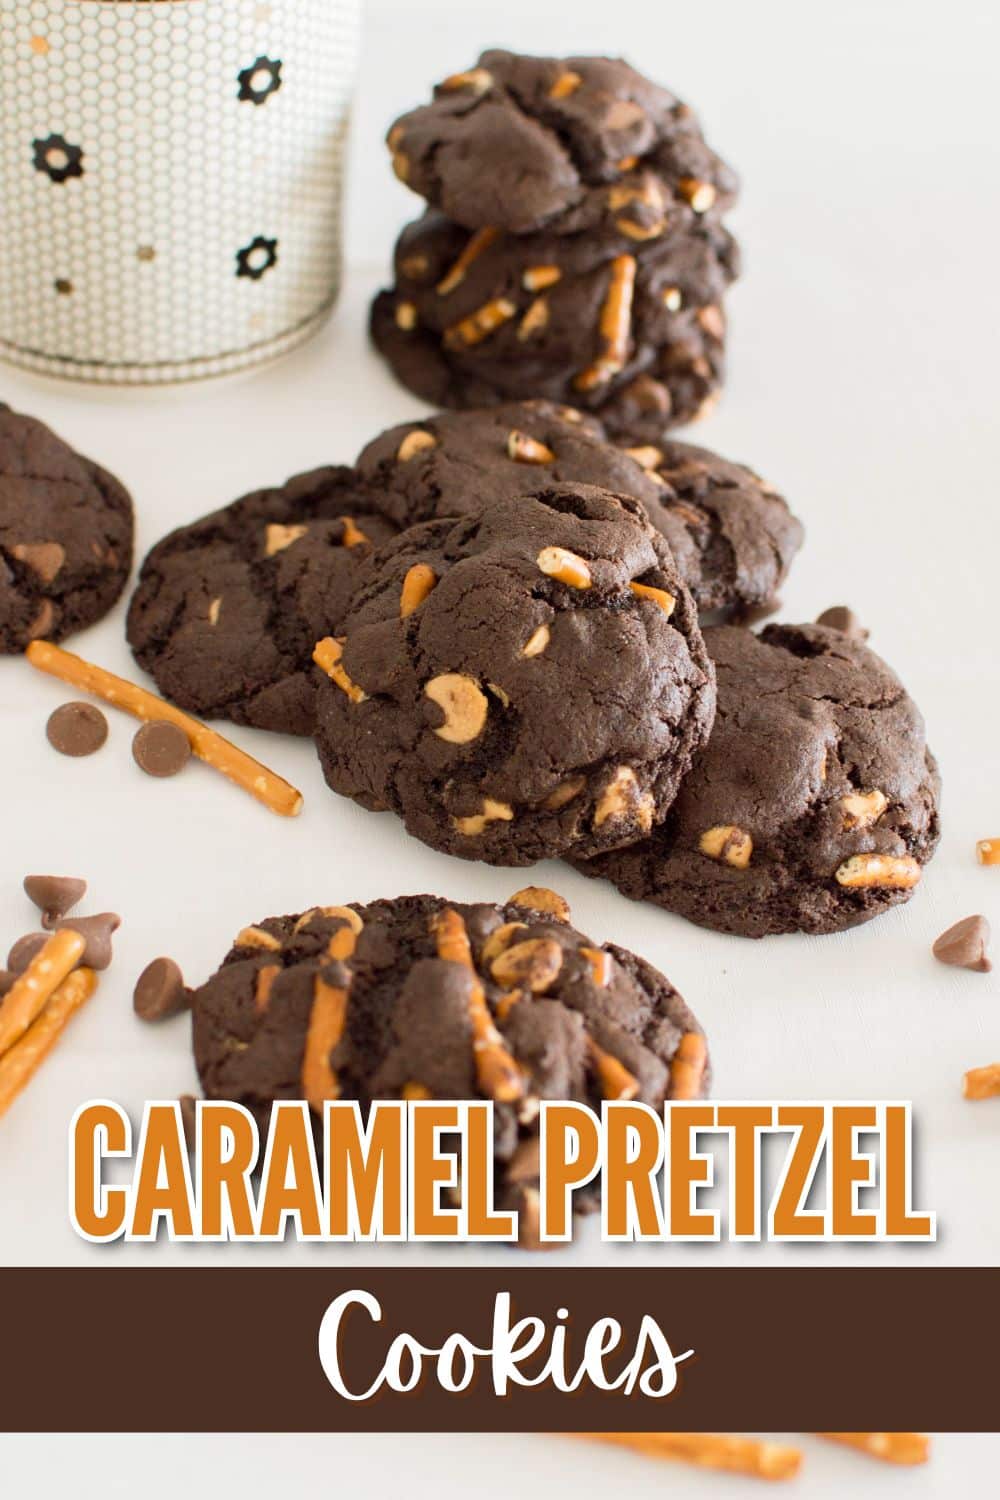 Caramel pretzel cookies are sweet and salty treats that combine the rich flavors of caramel with the crunchiness of pretzels. These delectable delights also feature chocolate chips, adding a delightful burst